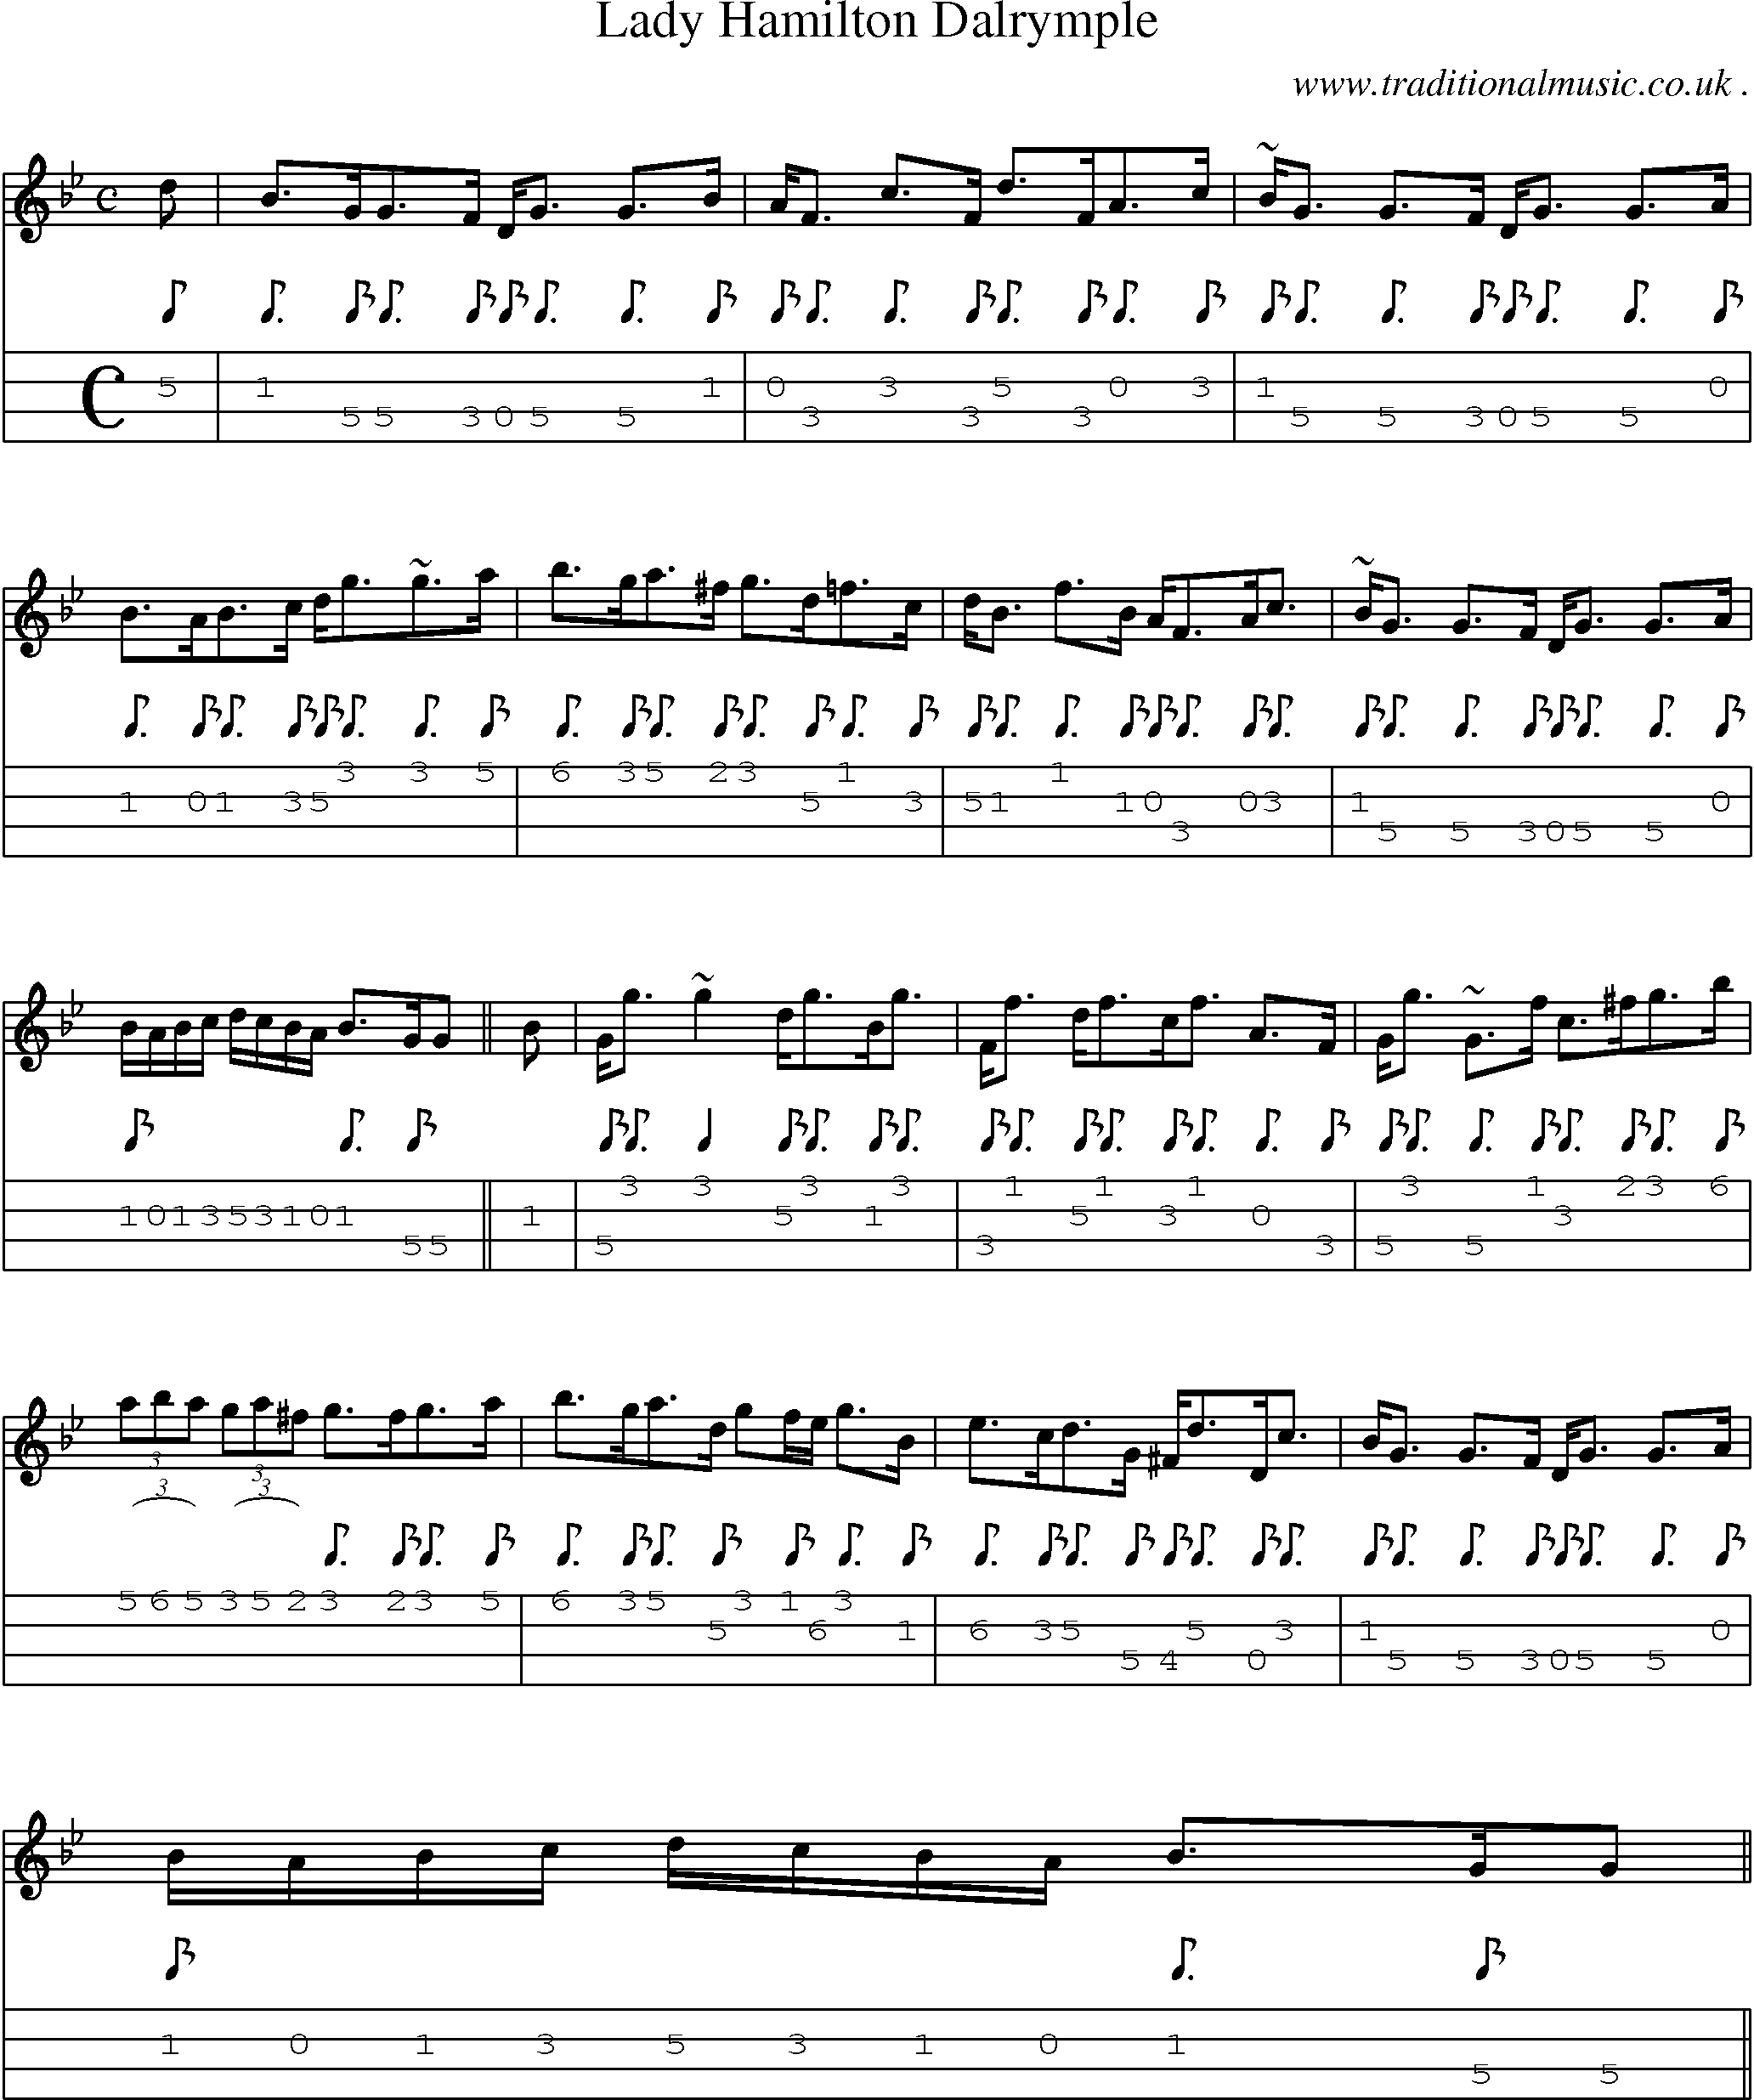 Sheet-music  score, Chords and Mandolin Tabs for Lady Hamilton Dalrymple